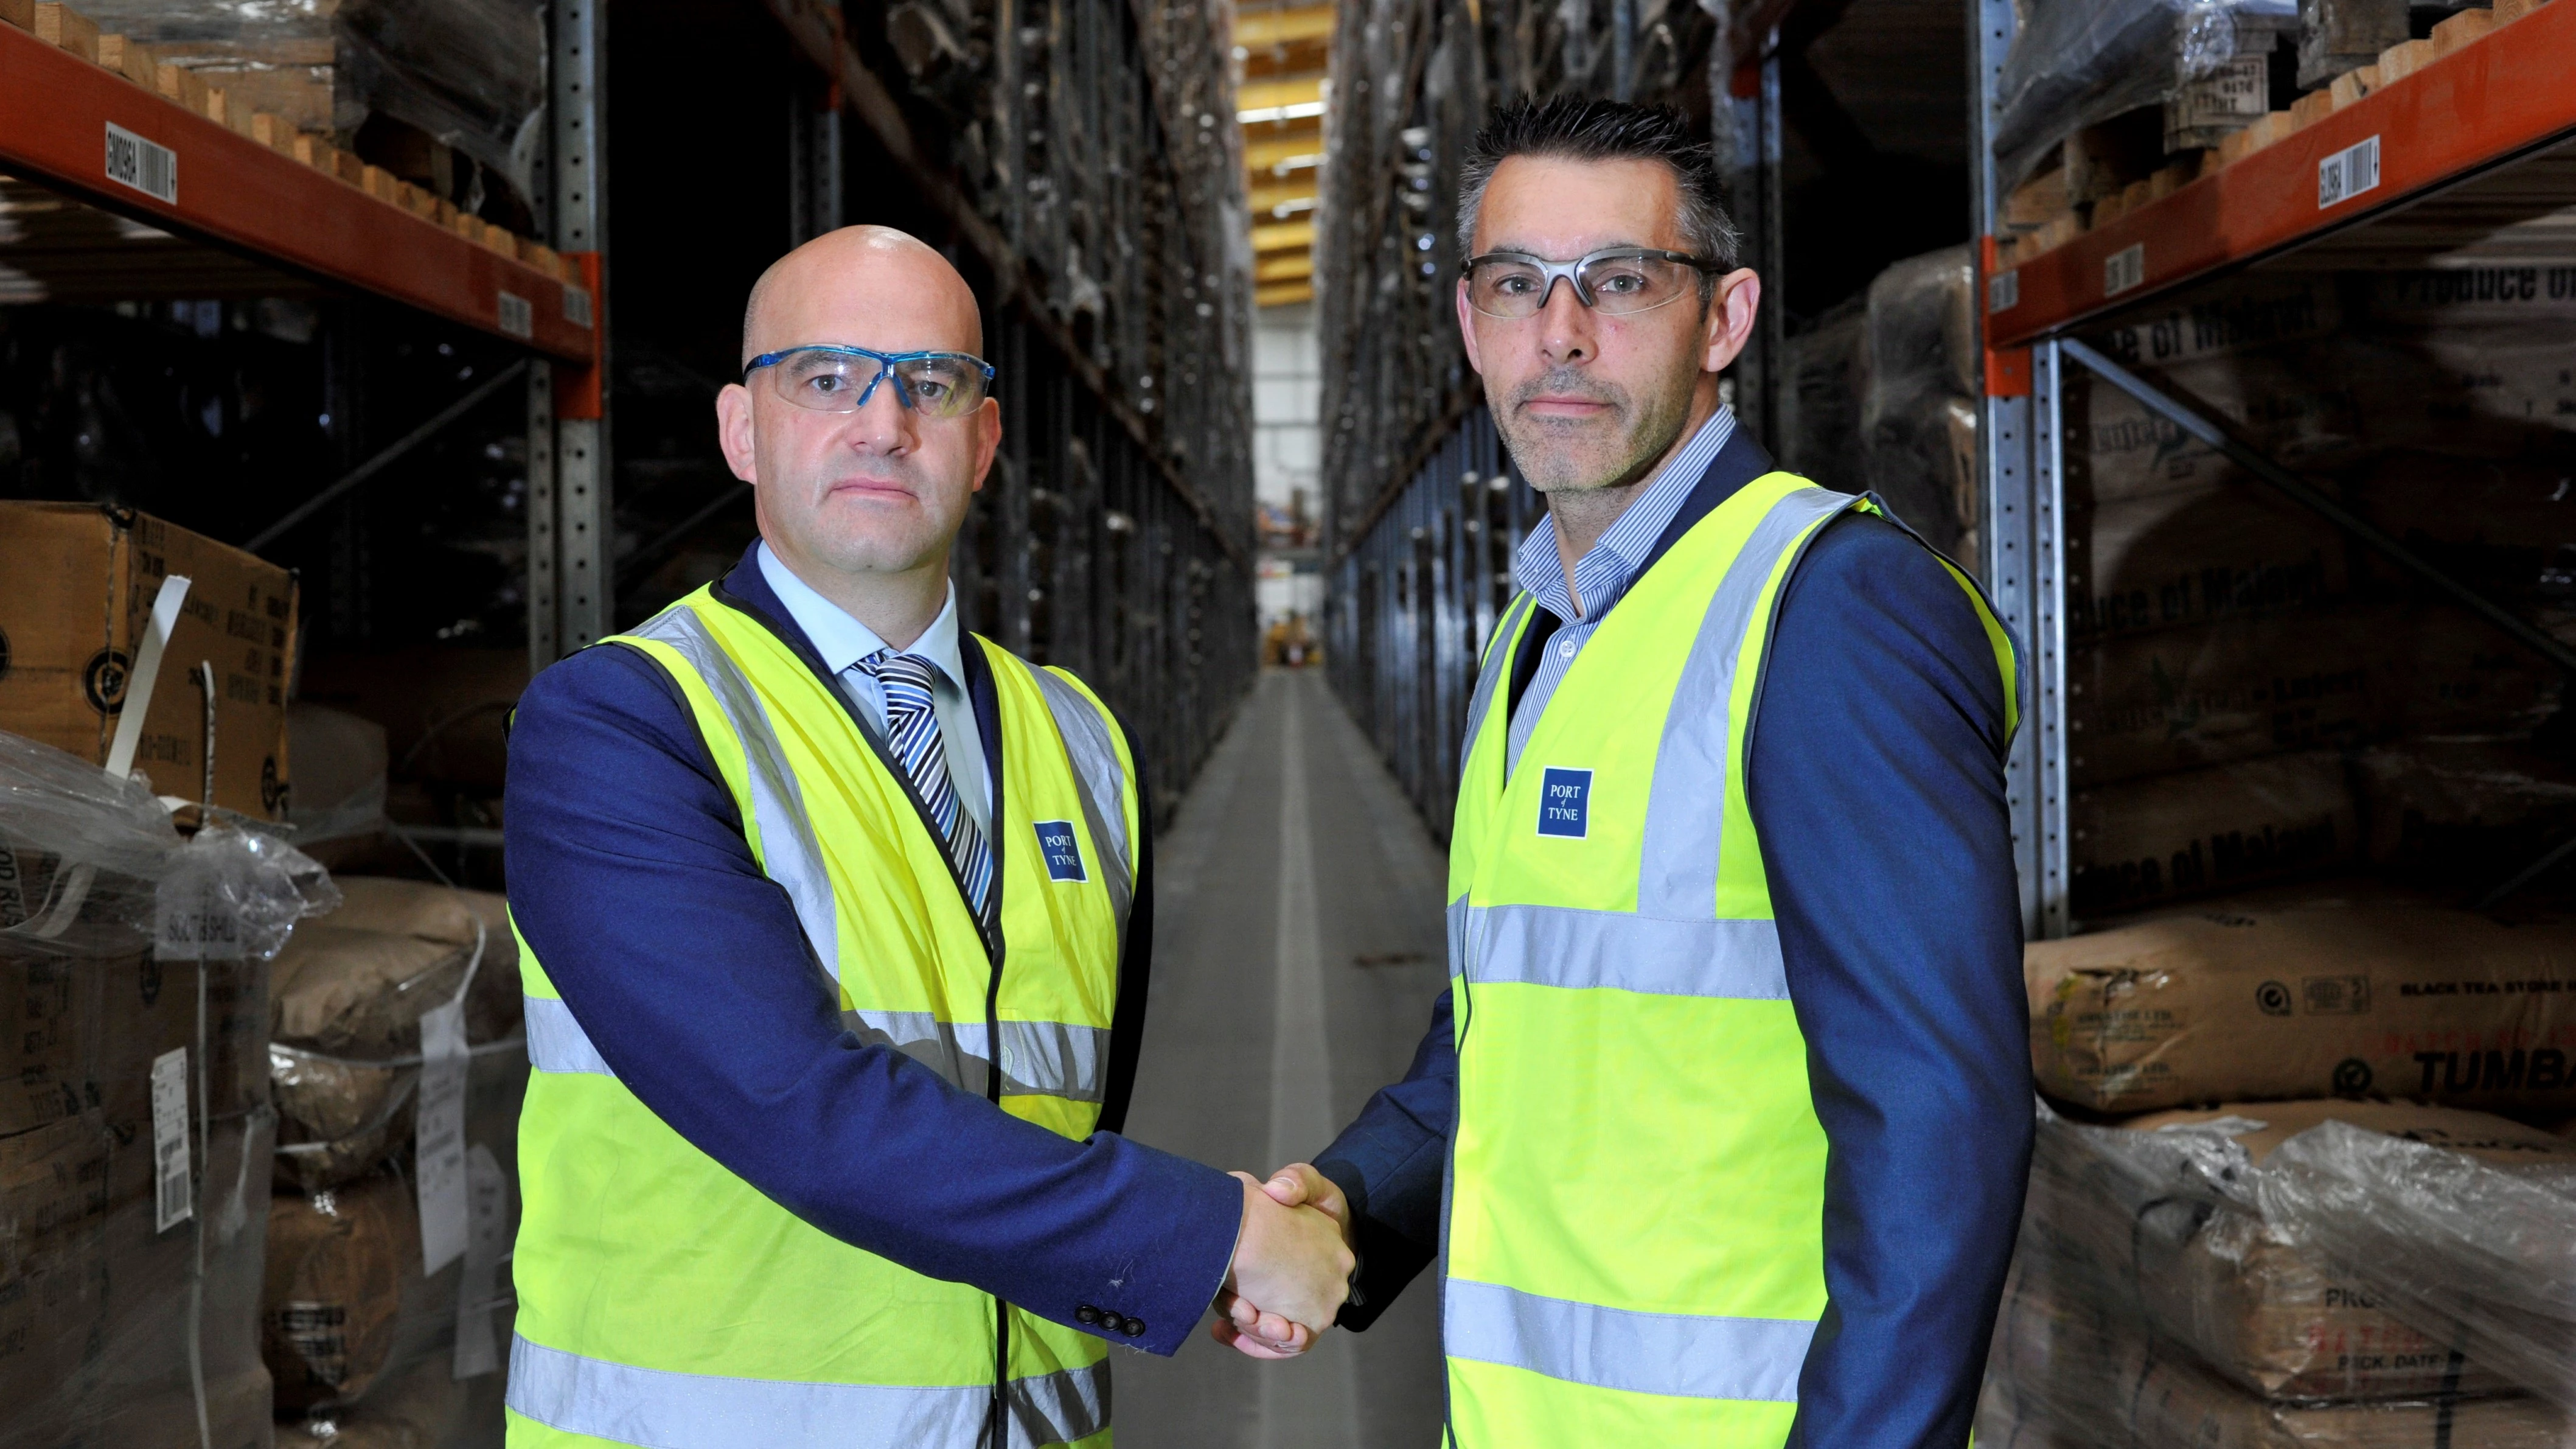 Port of Tyne Commercial Director Logistics, Richard Newton cements new deal with Ringtons Head of Coffee, Stephen Drysdale